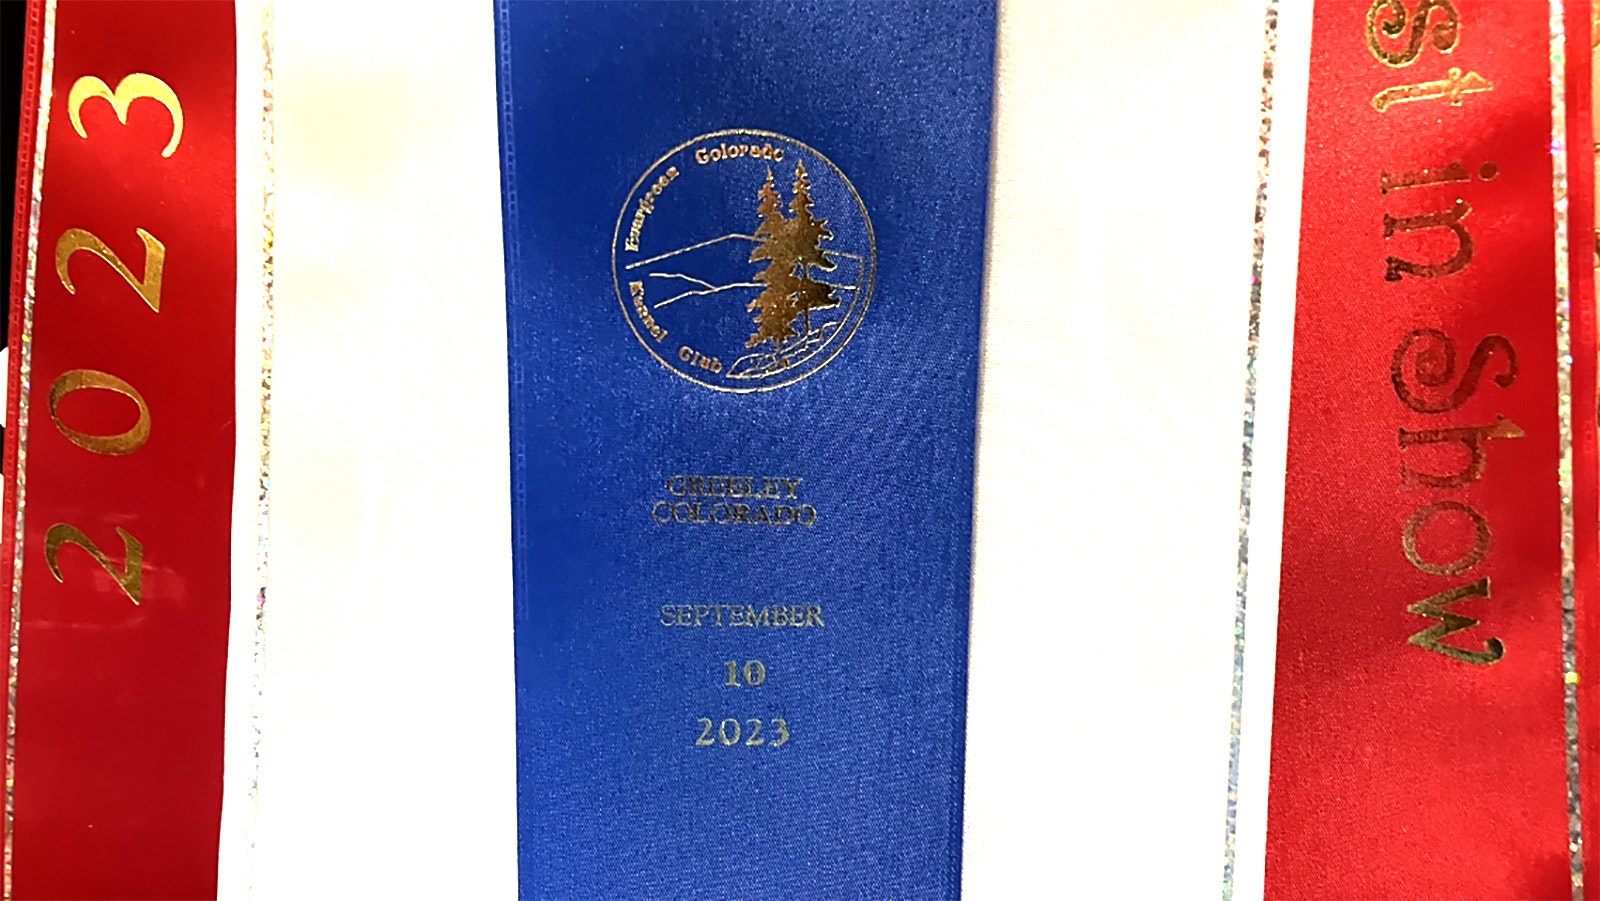 Rowan took the top ribbon as Best in Show during a competition at the Evergreen Kennel Club in Greeley, Colorado in September.